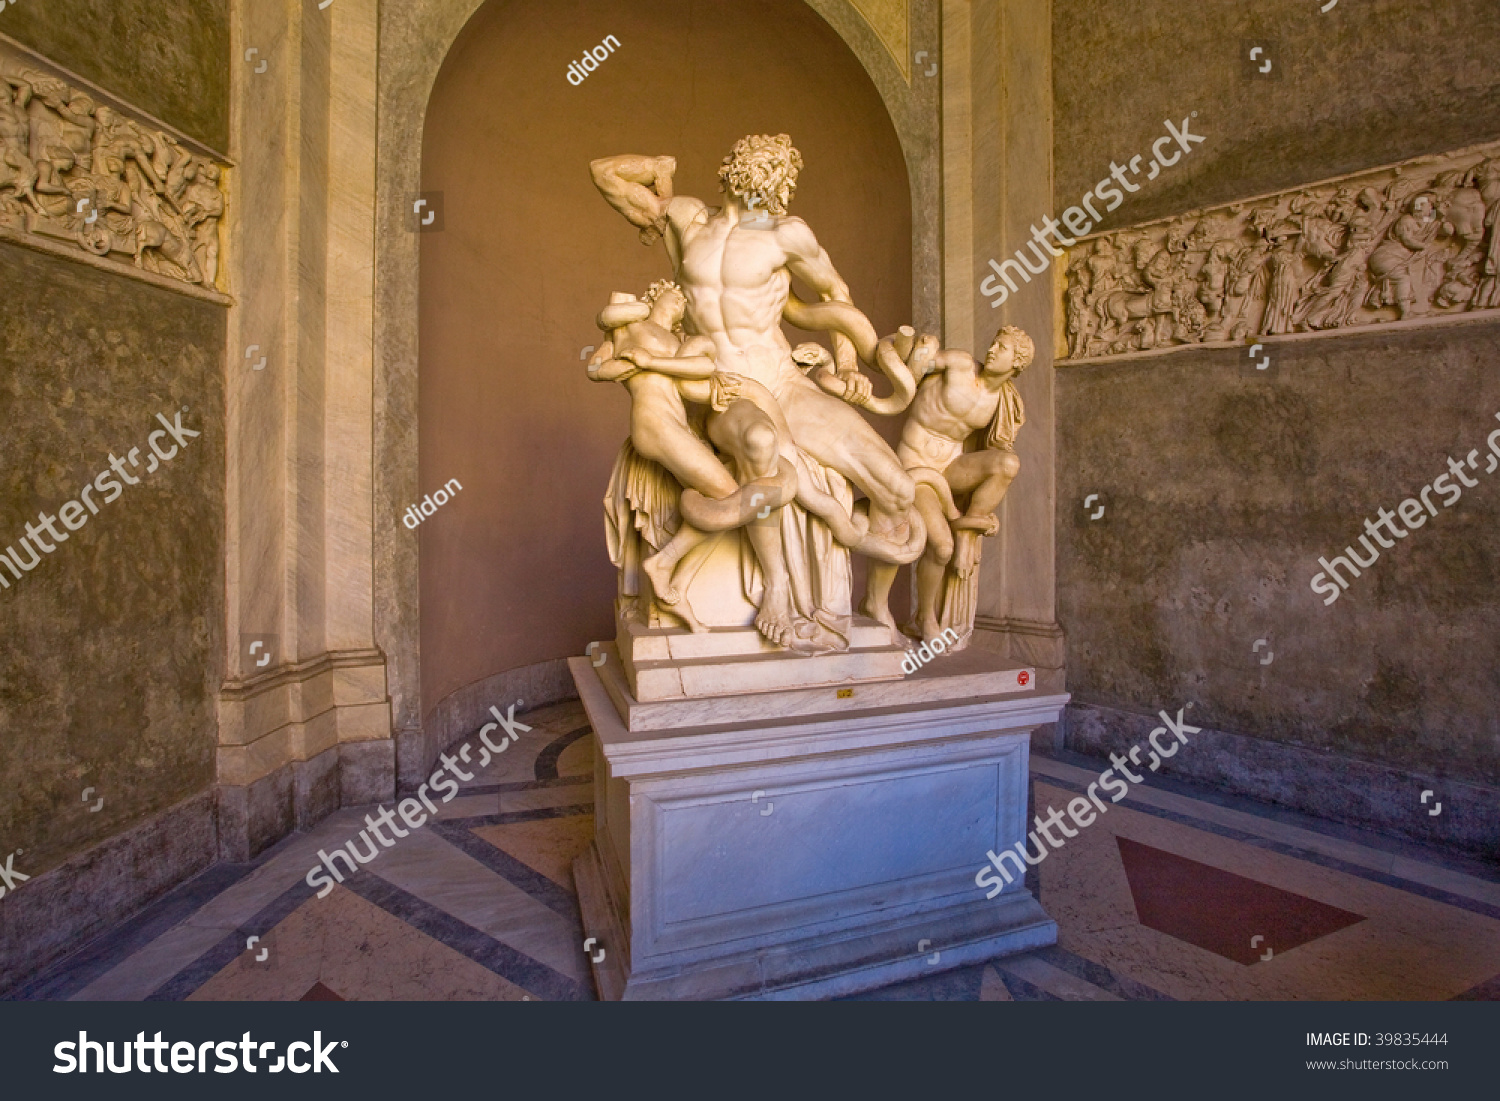 The Statue Of Laocoon And His Sons, Vatican Museum, Rome Stock Photo ...